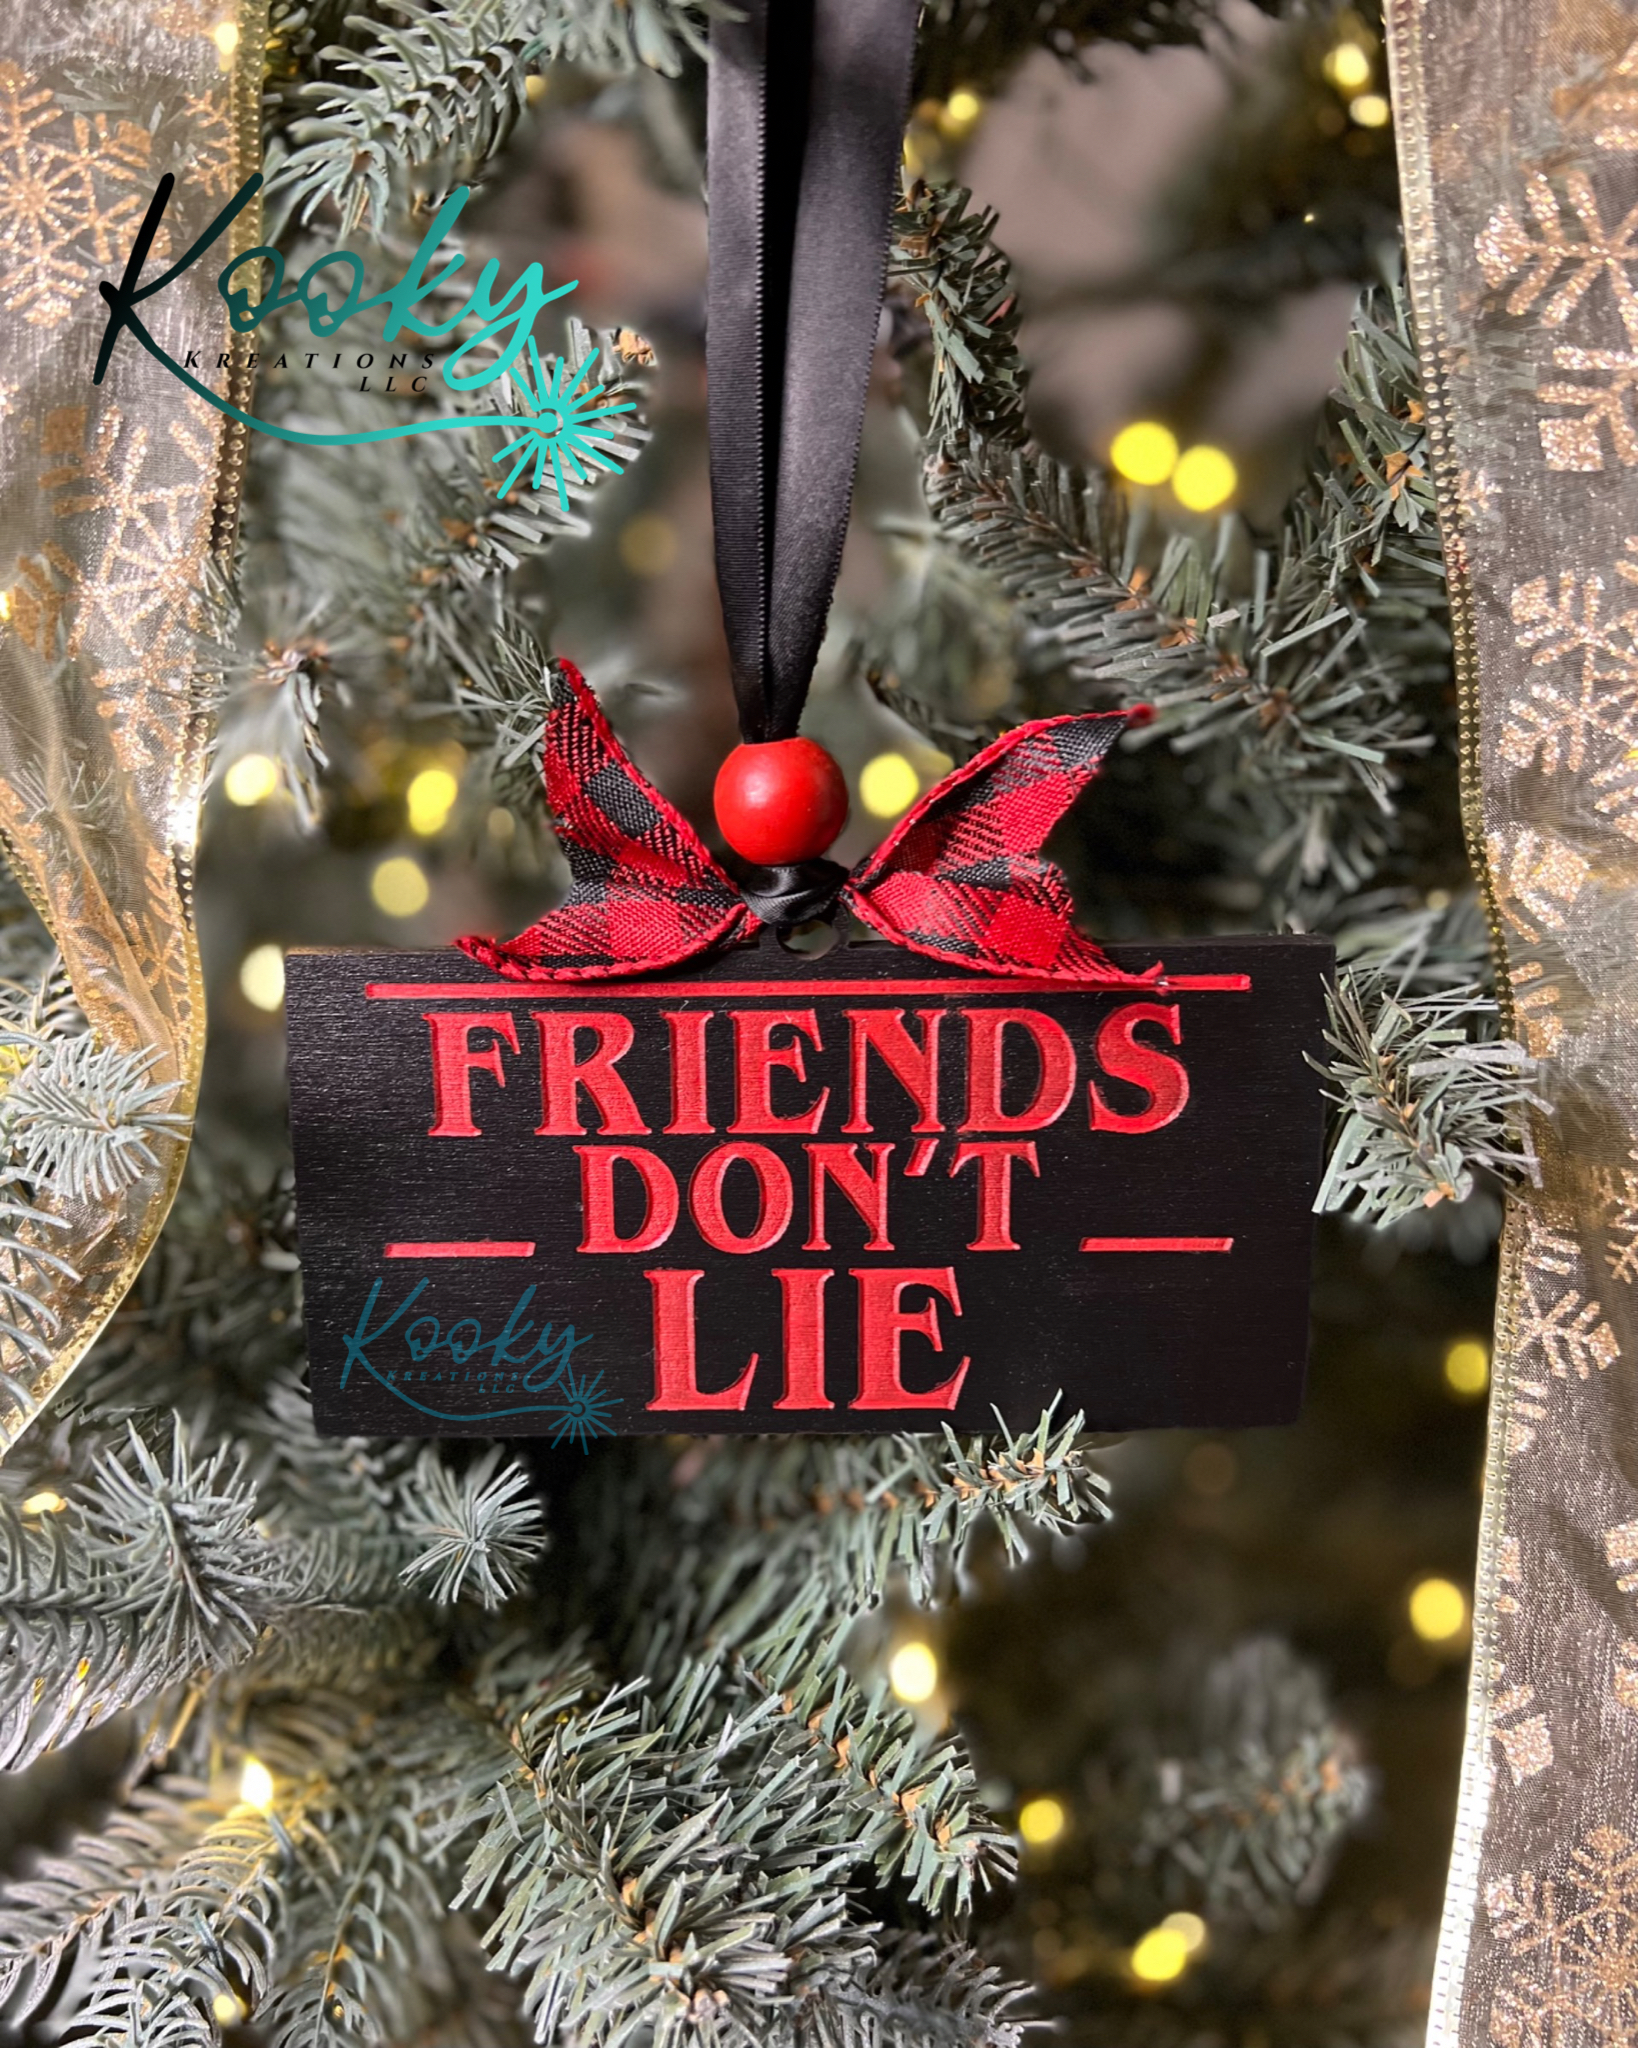 How To Make Your Own DIY Stranger Things Ornament